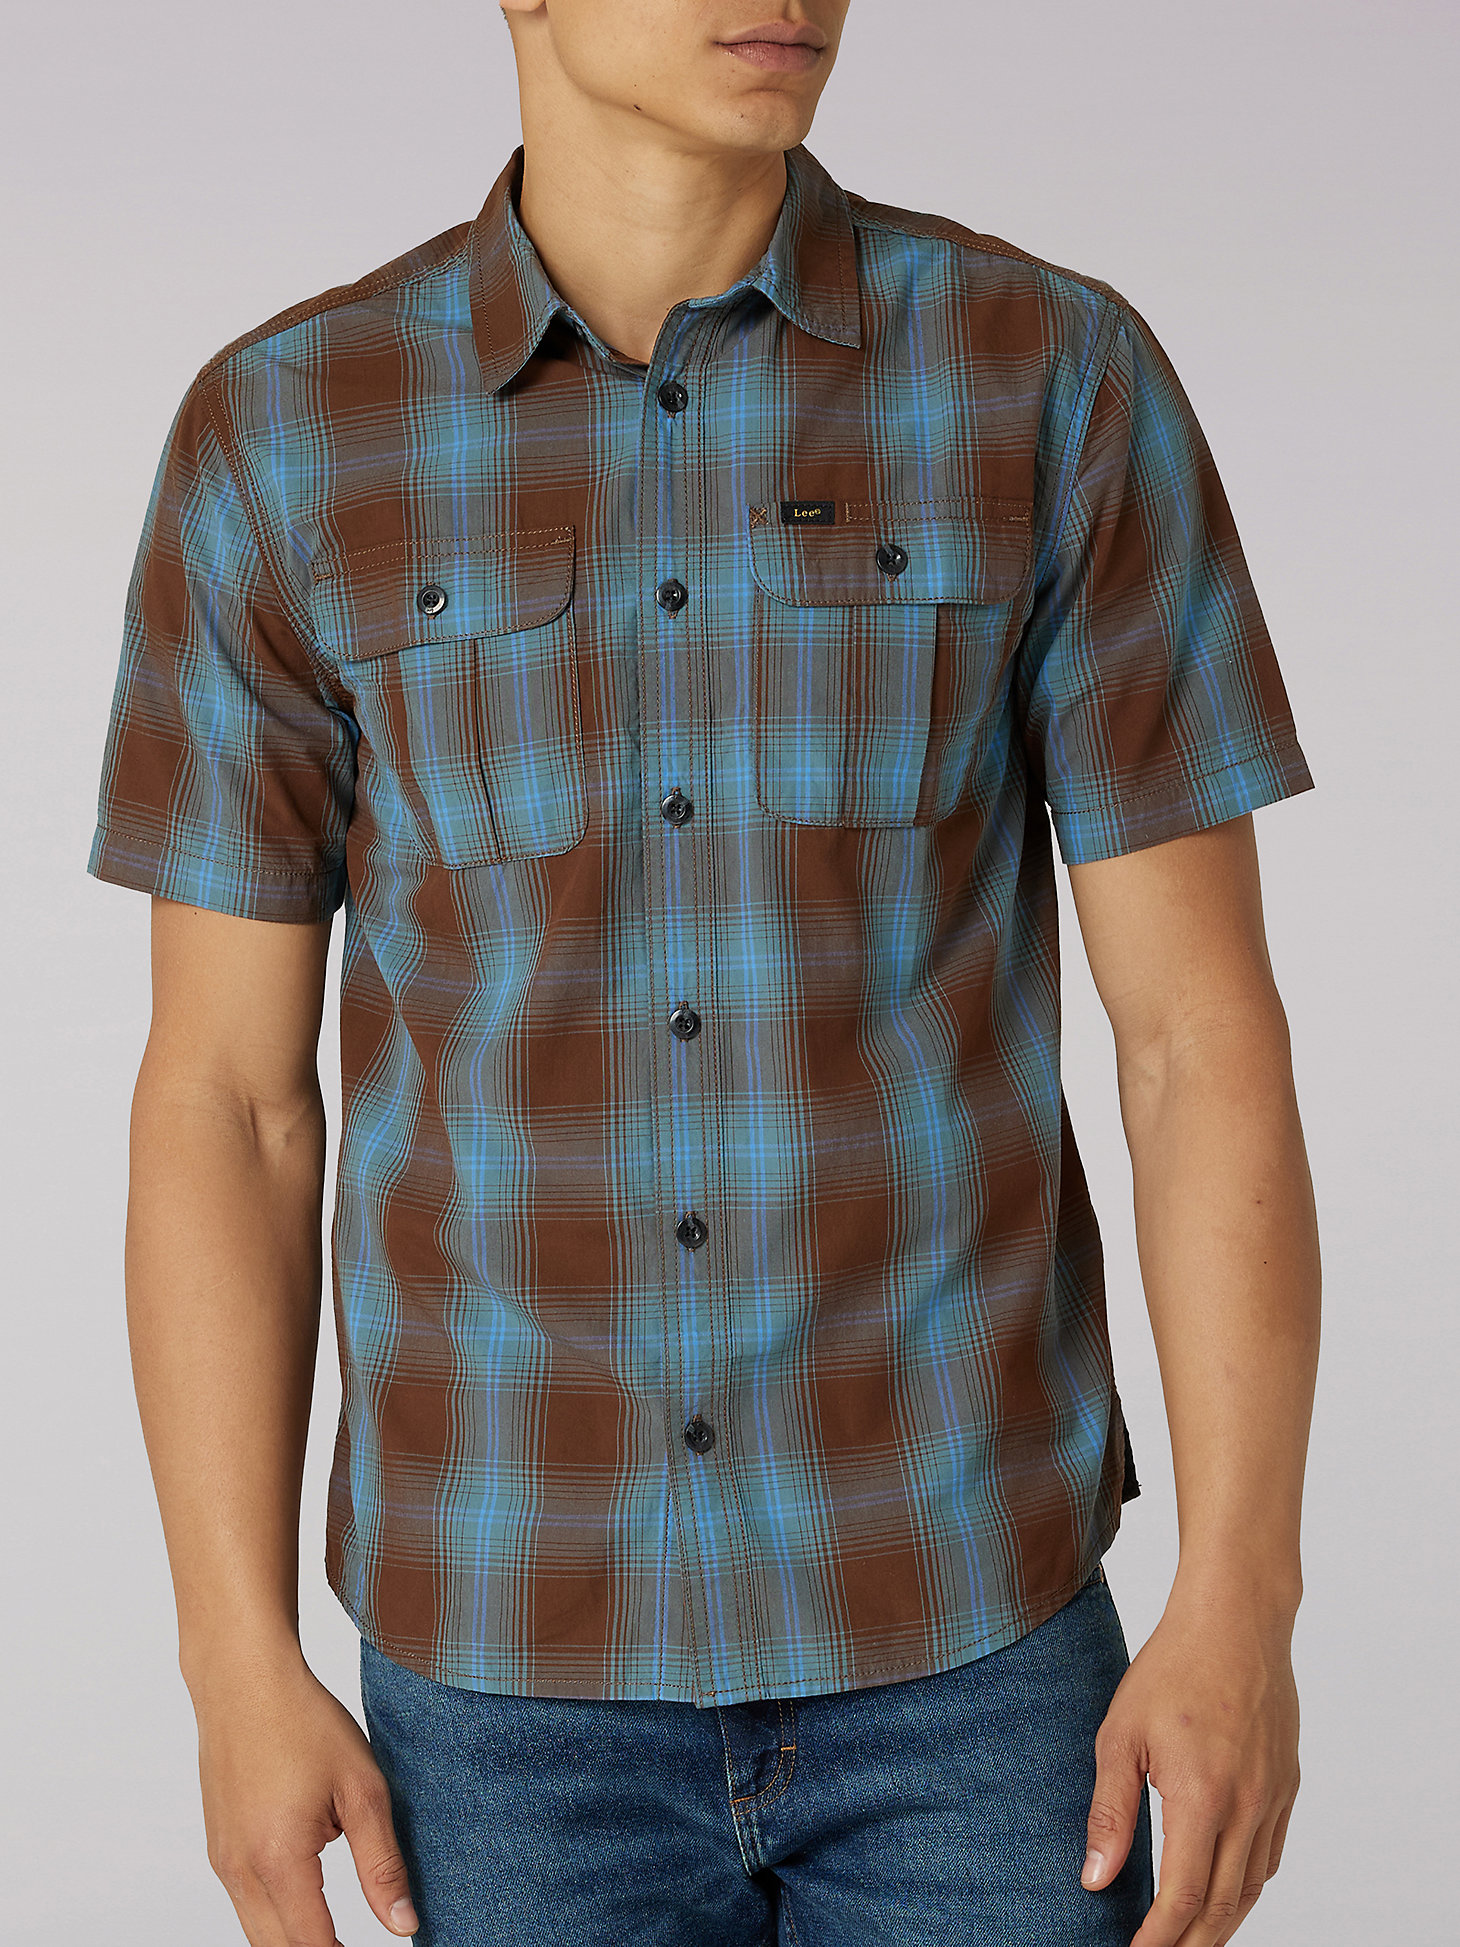 Men's Working West Button Down Short Sleeve Shirt in Copper Brown main view